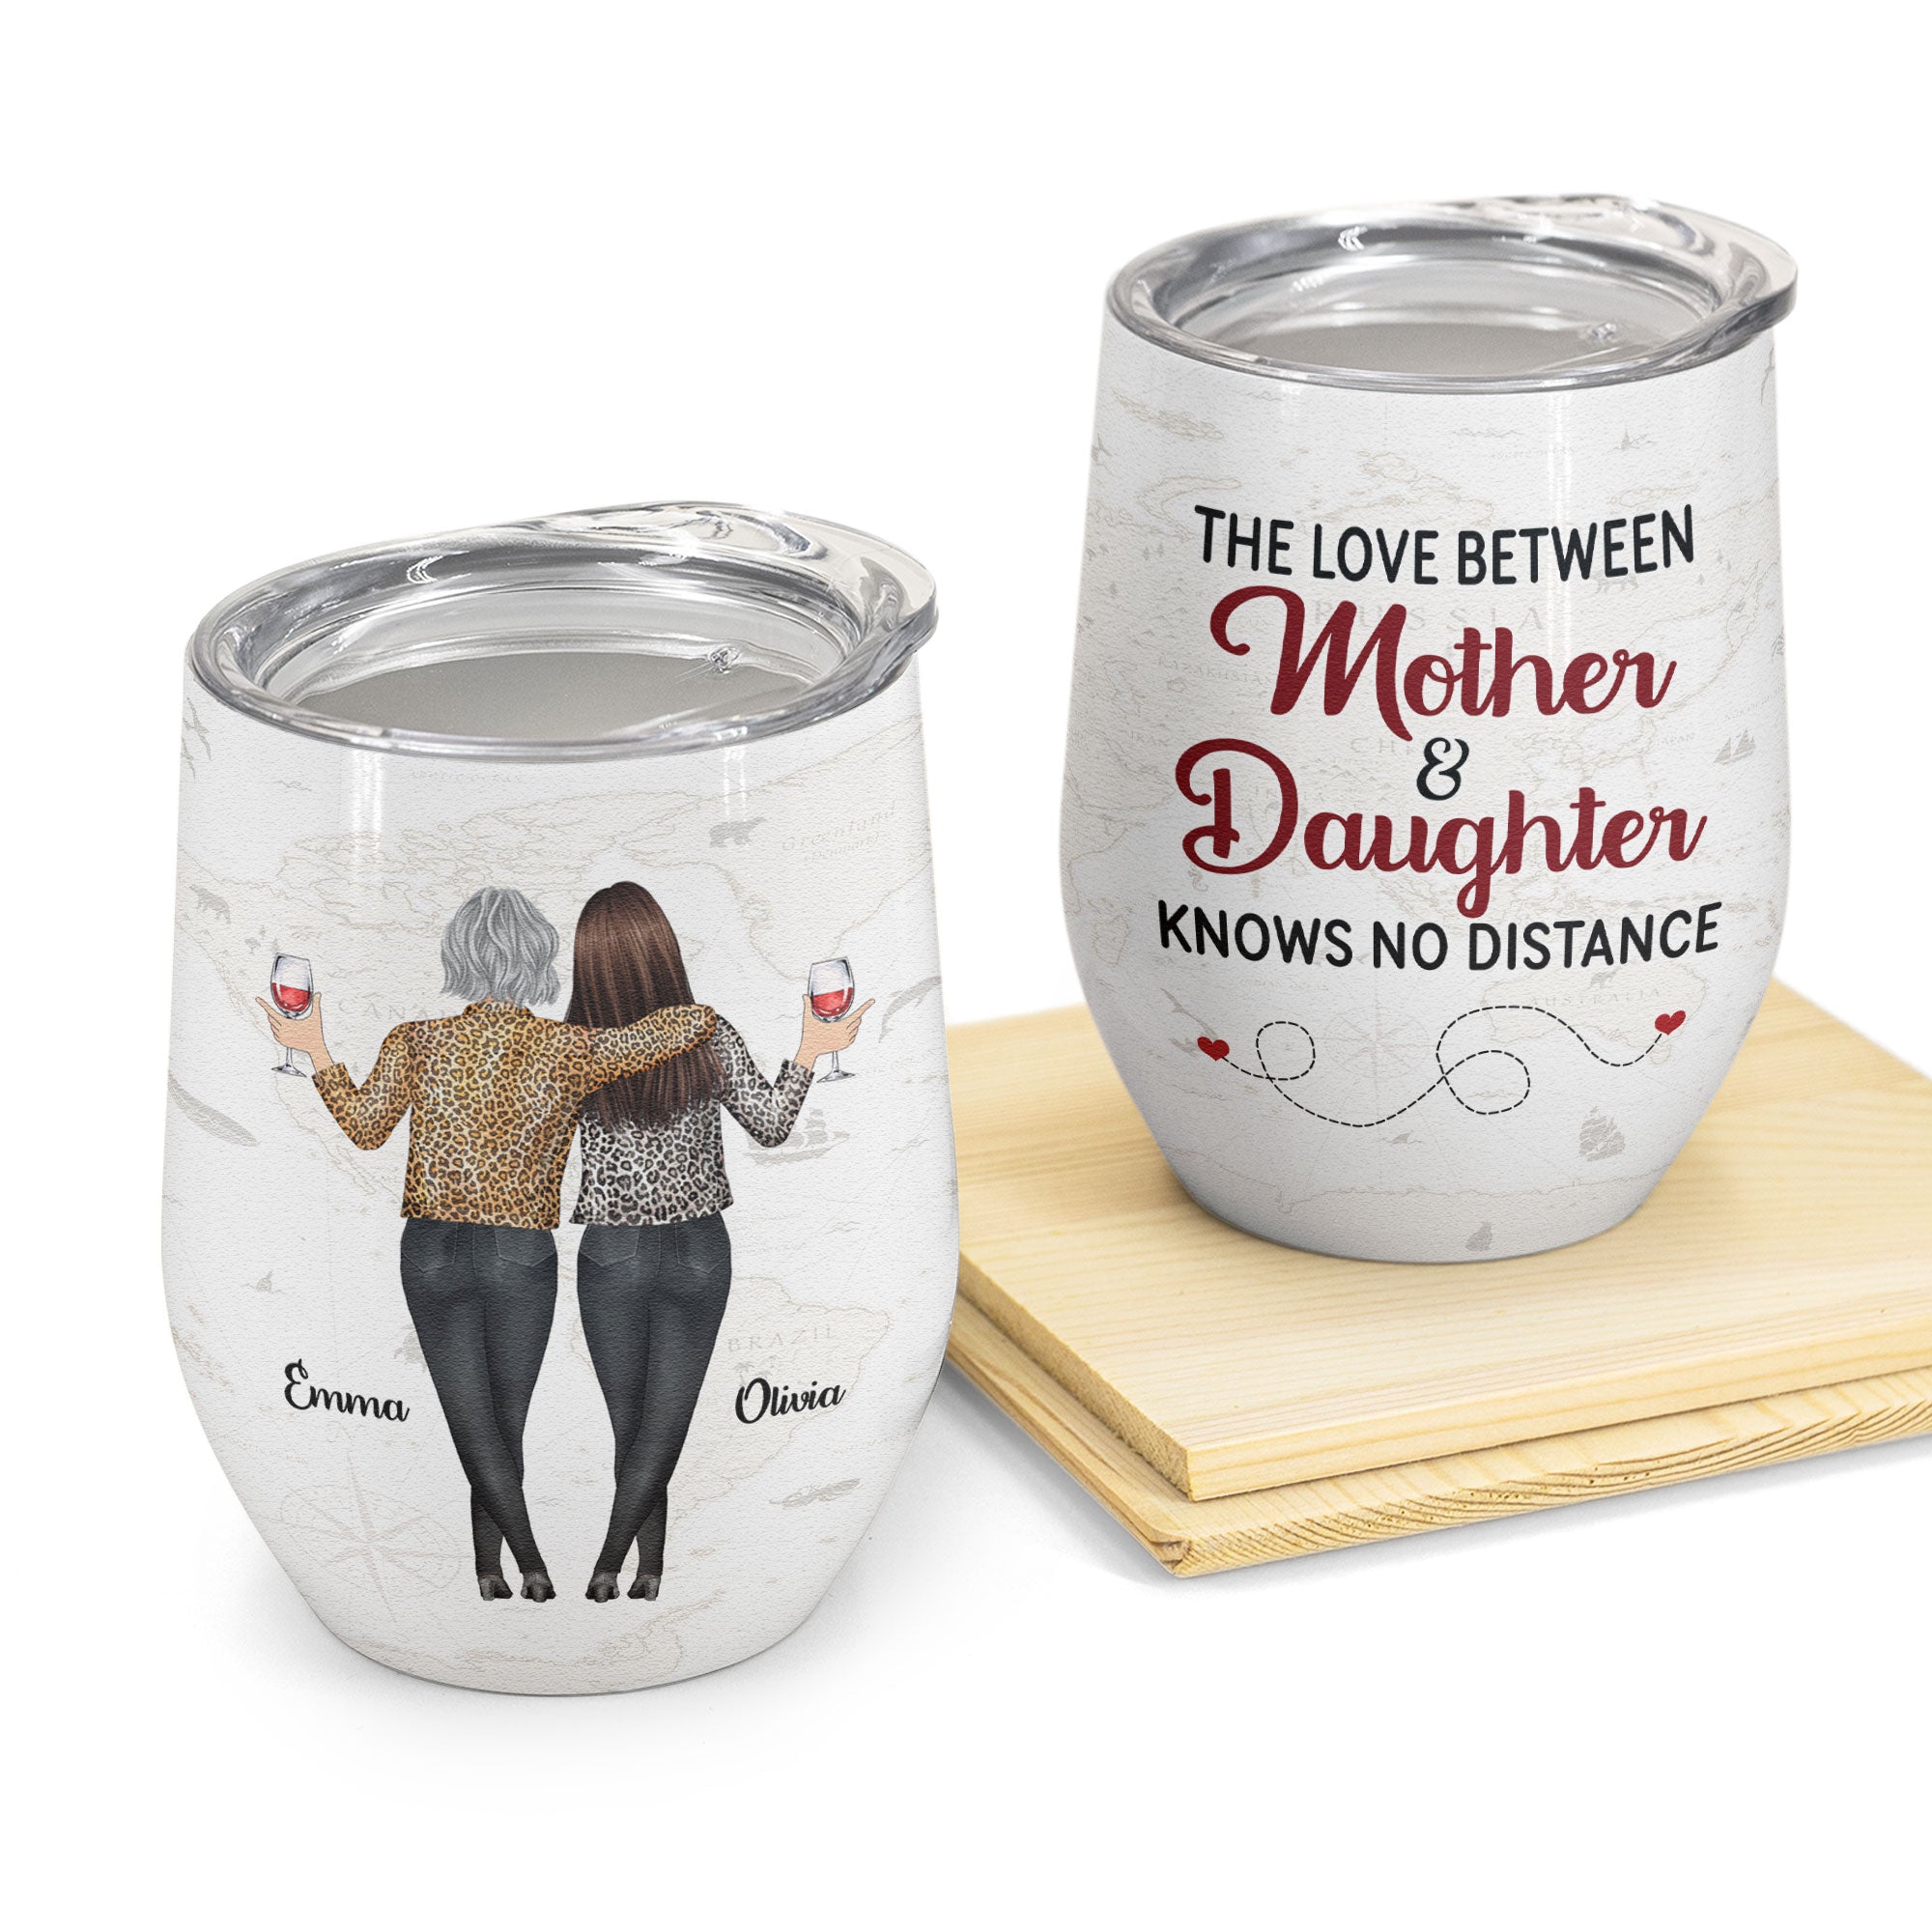 The Love Between Mother & Daughter Knows No Distance - Personalized Wine Tumbler - Mother's Day, Loving Gift For Mom, Mother